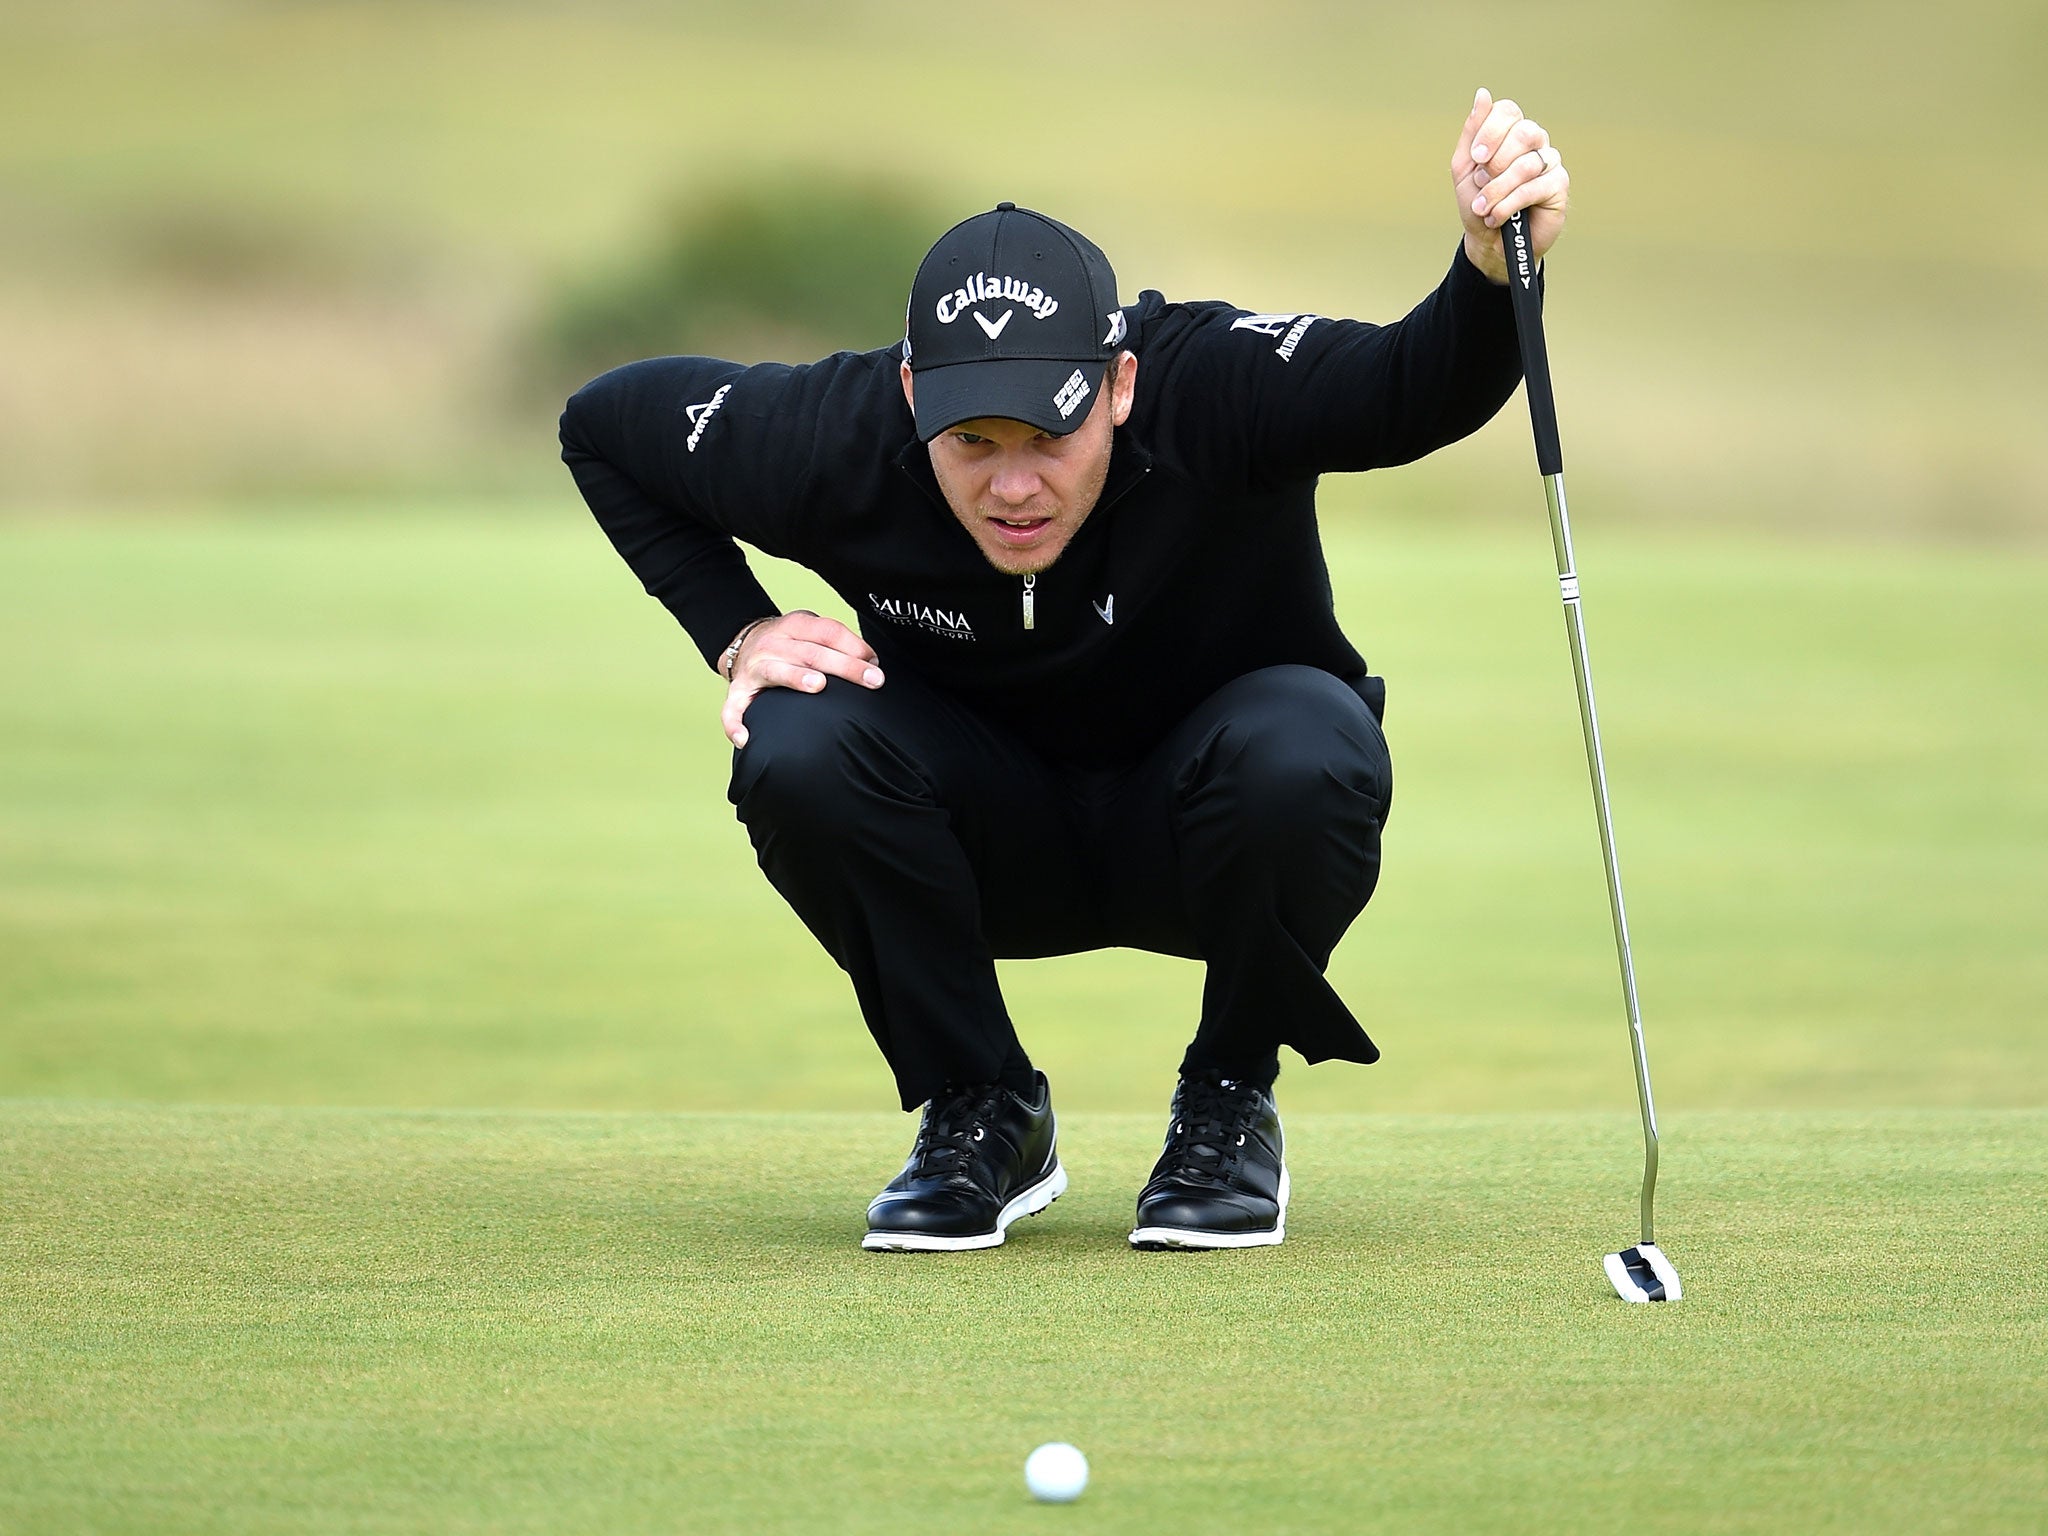 England's Danny Willett is in fine form